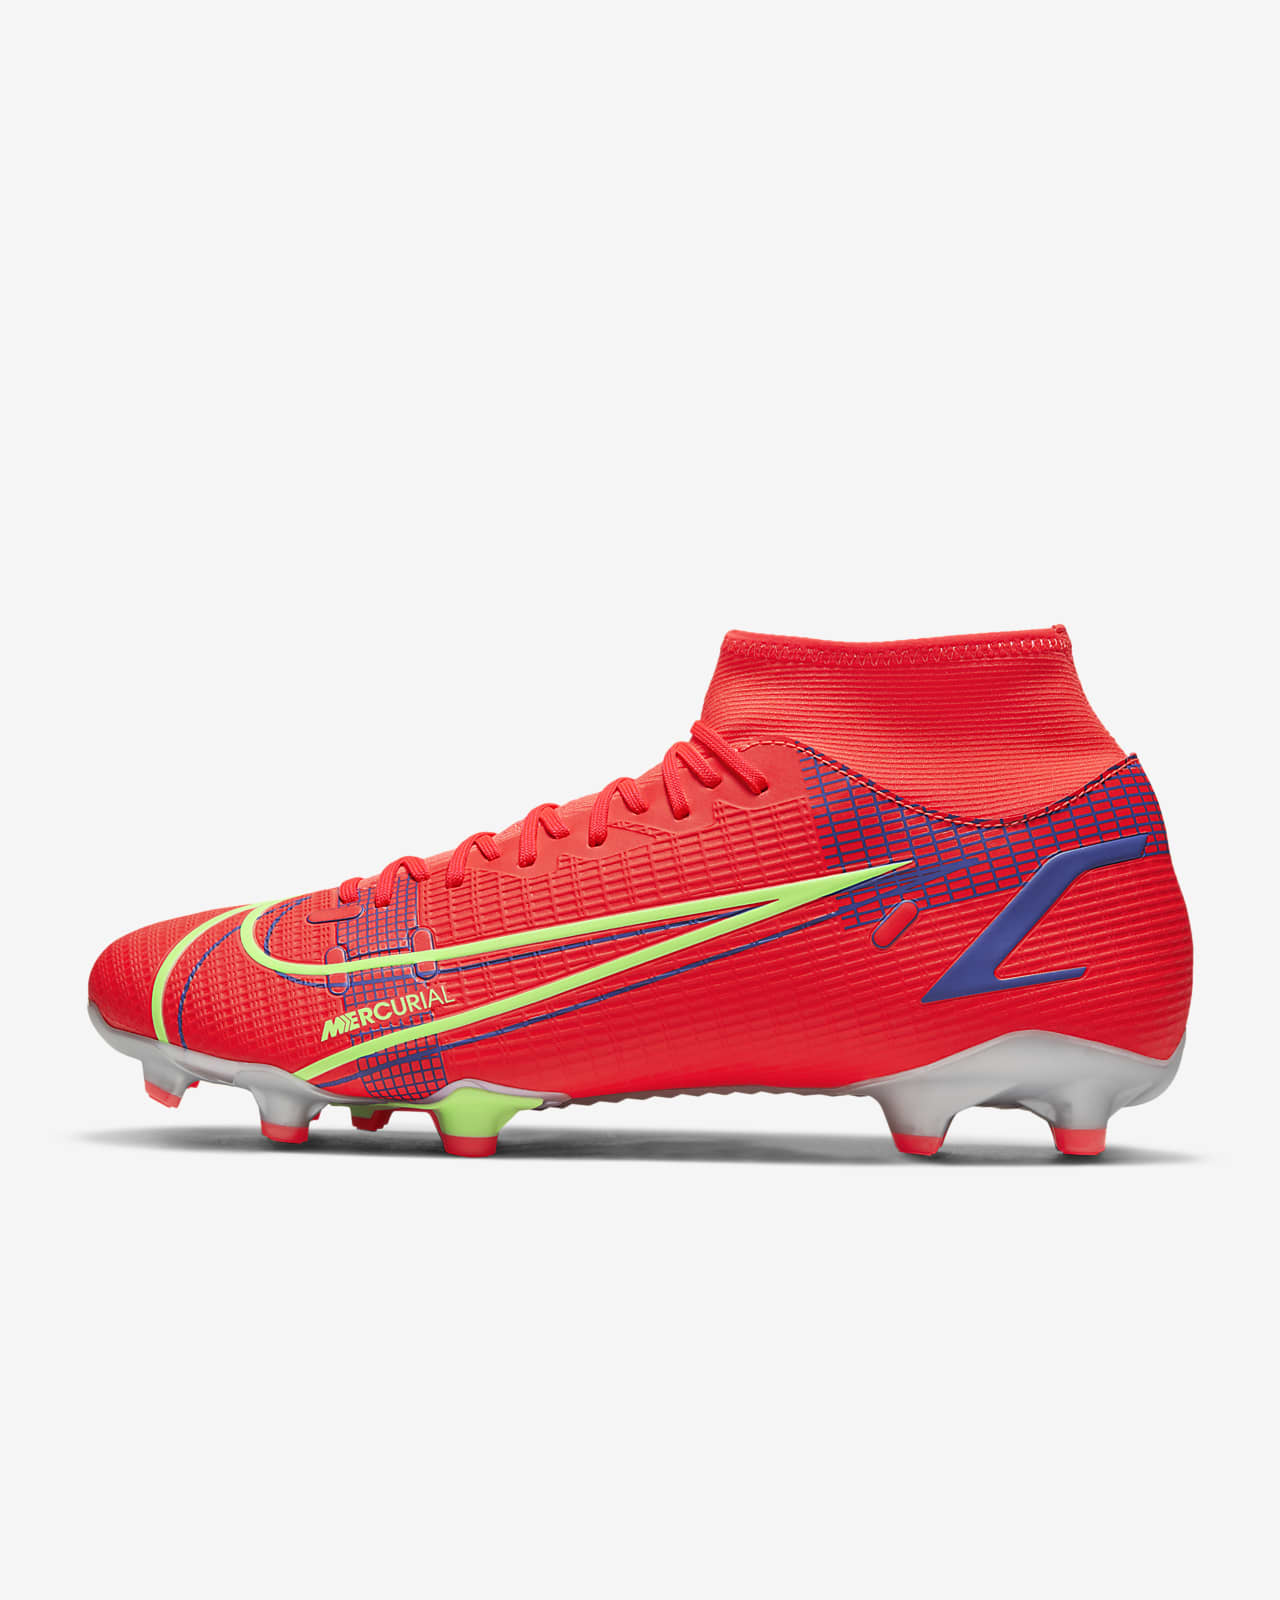 cleats from academy